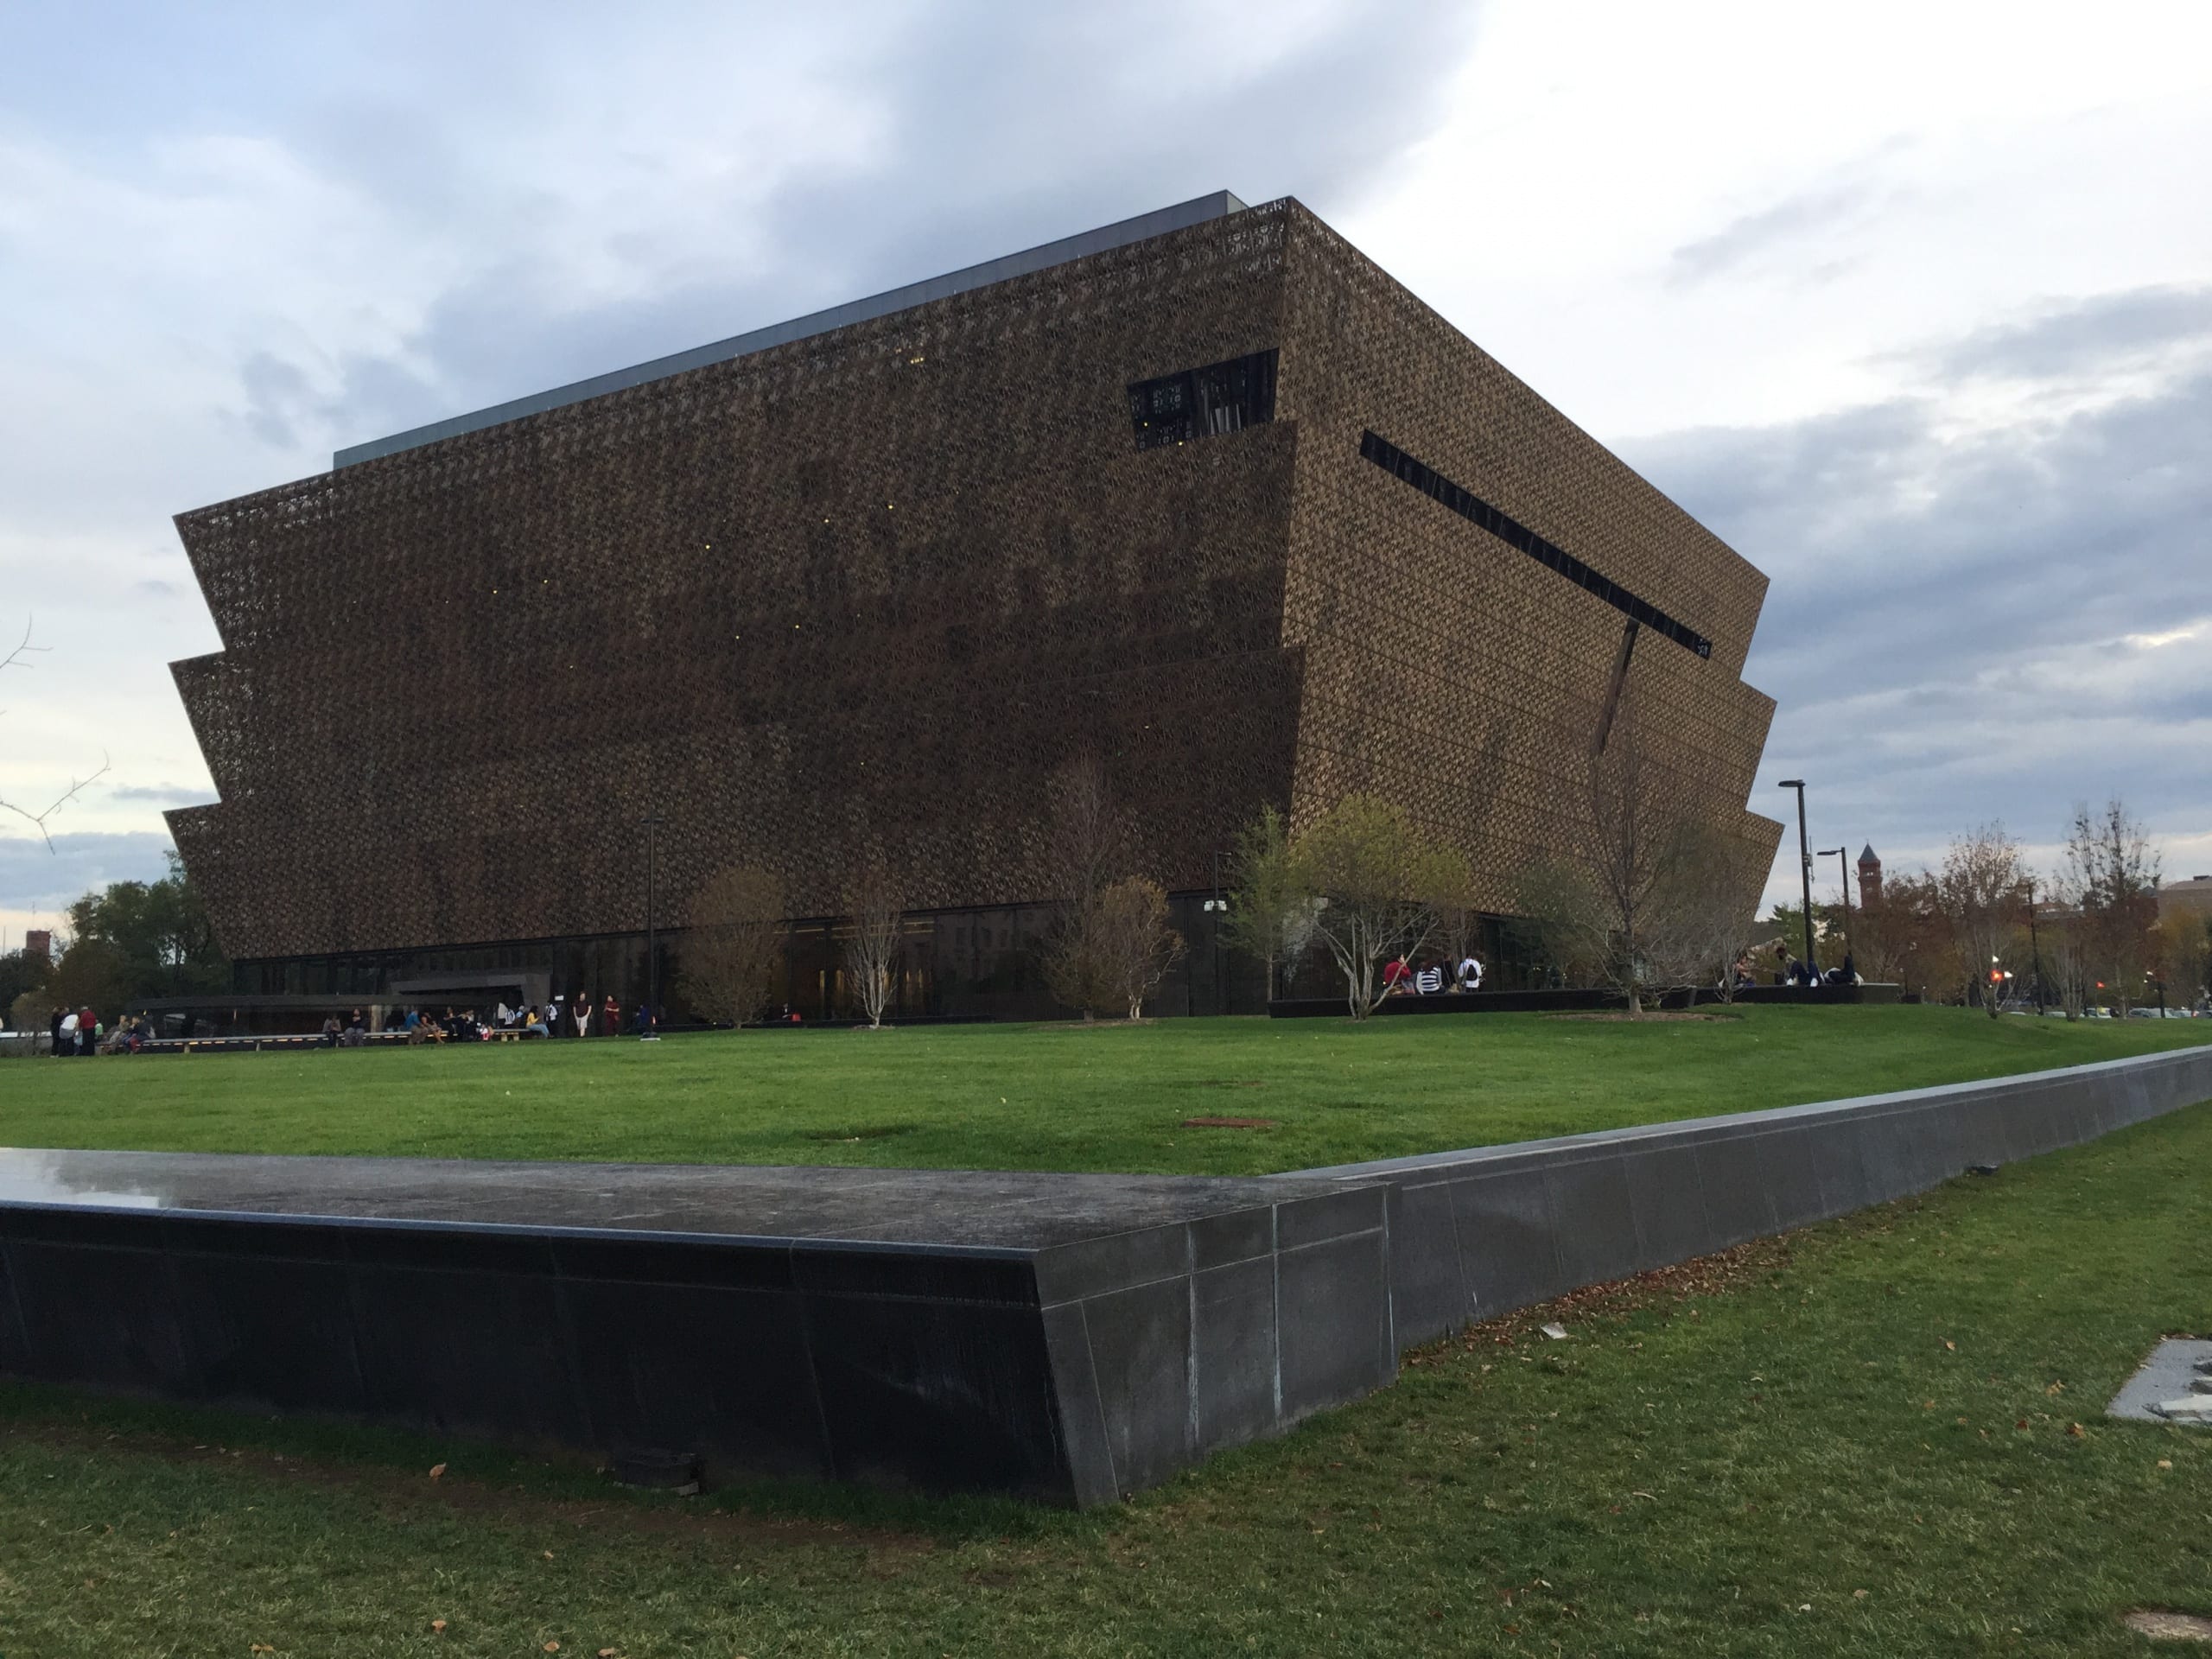 View of the NMAAHC building , showing the metal screen cladding of the exterior